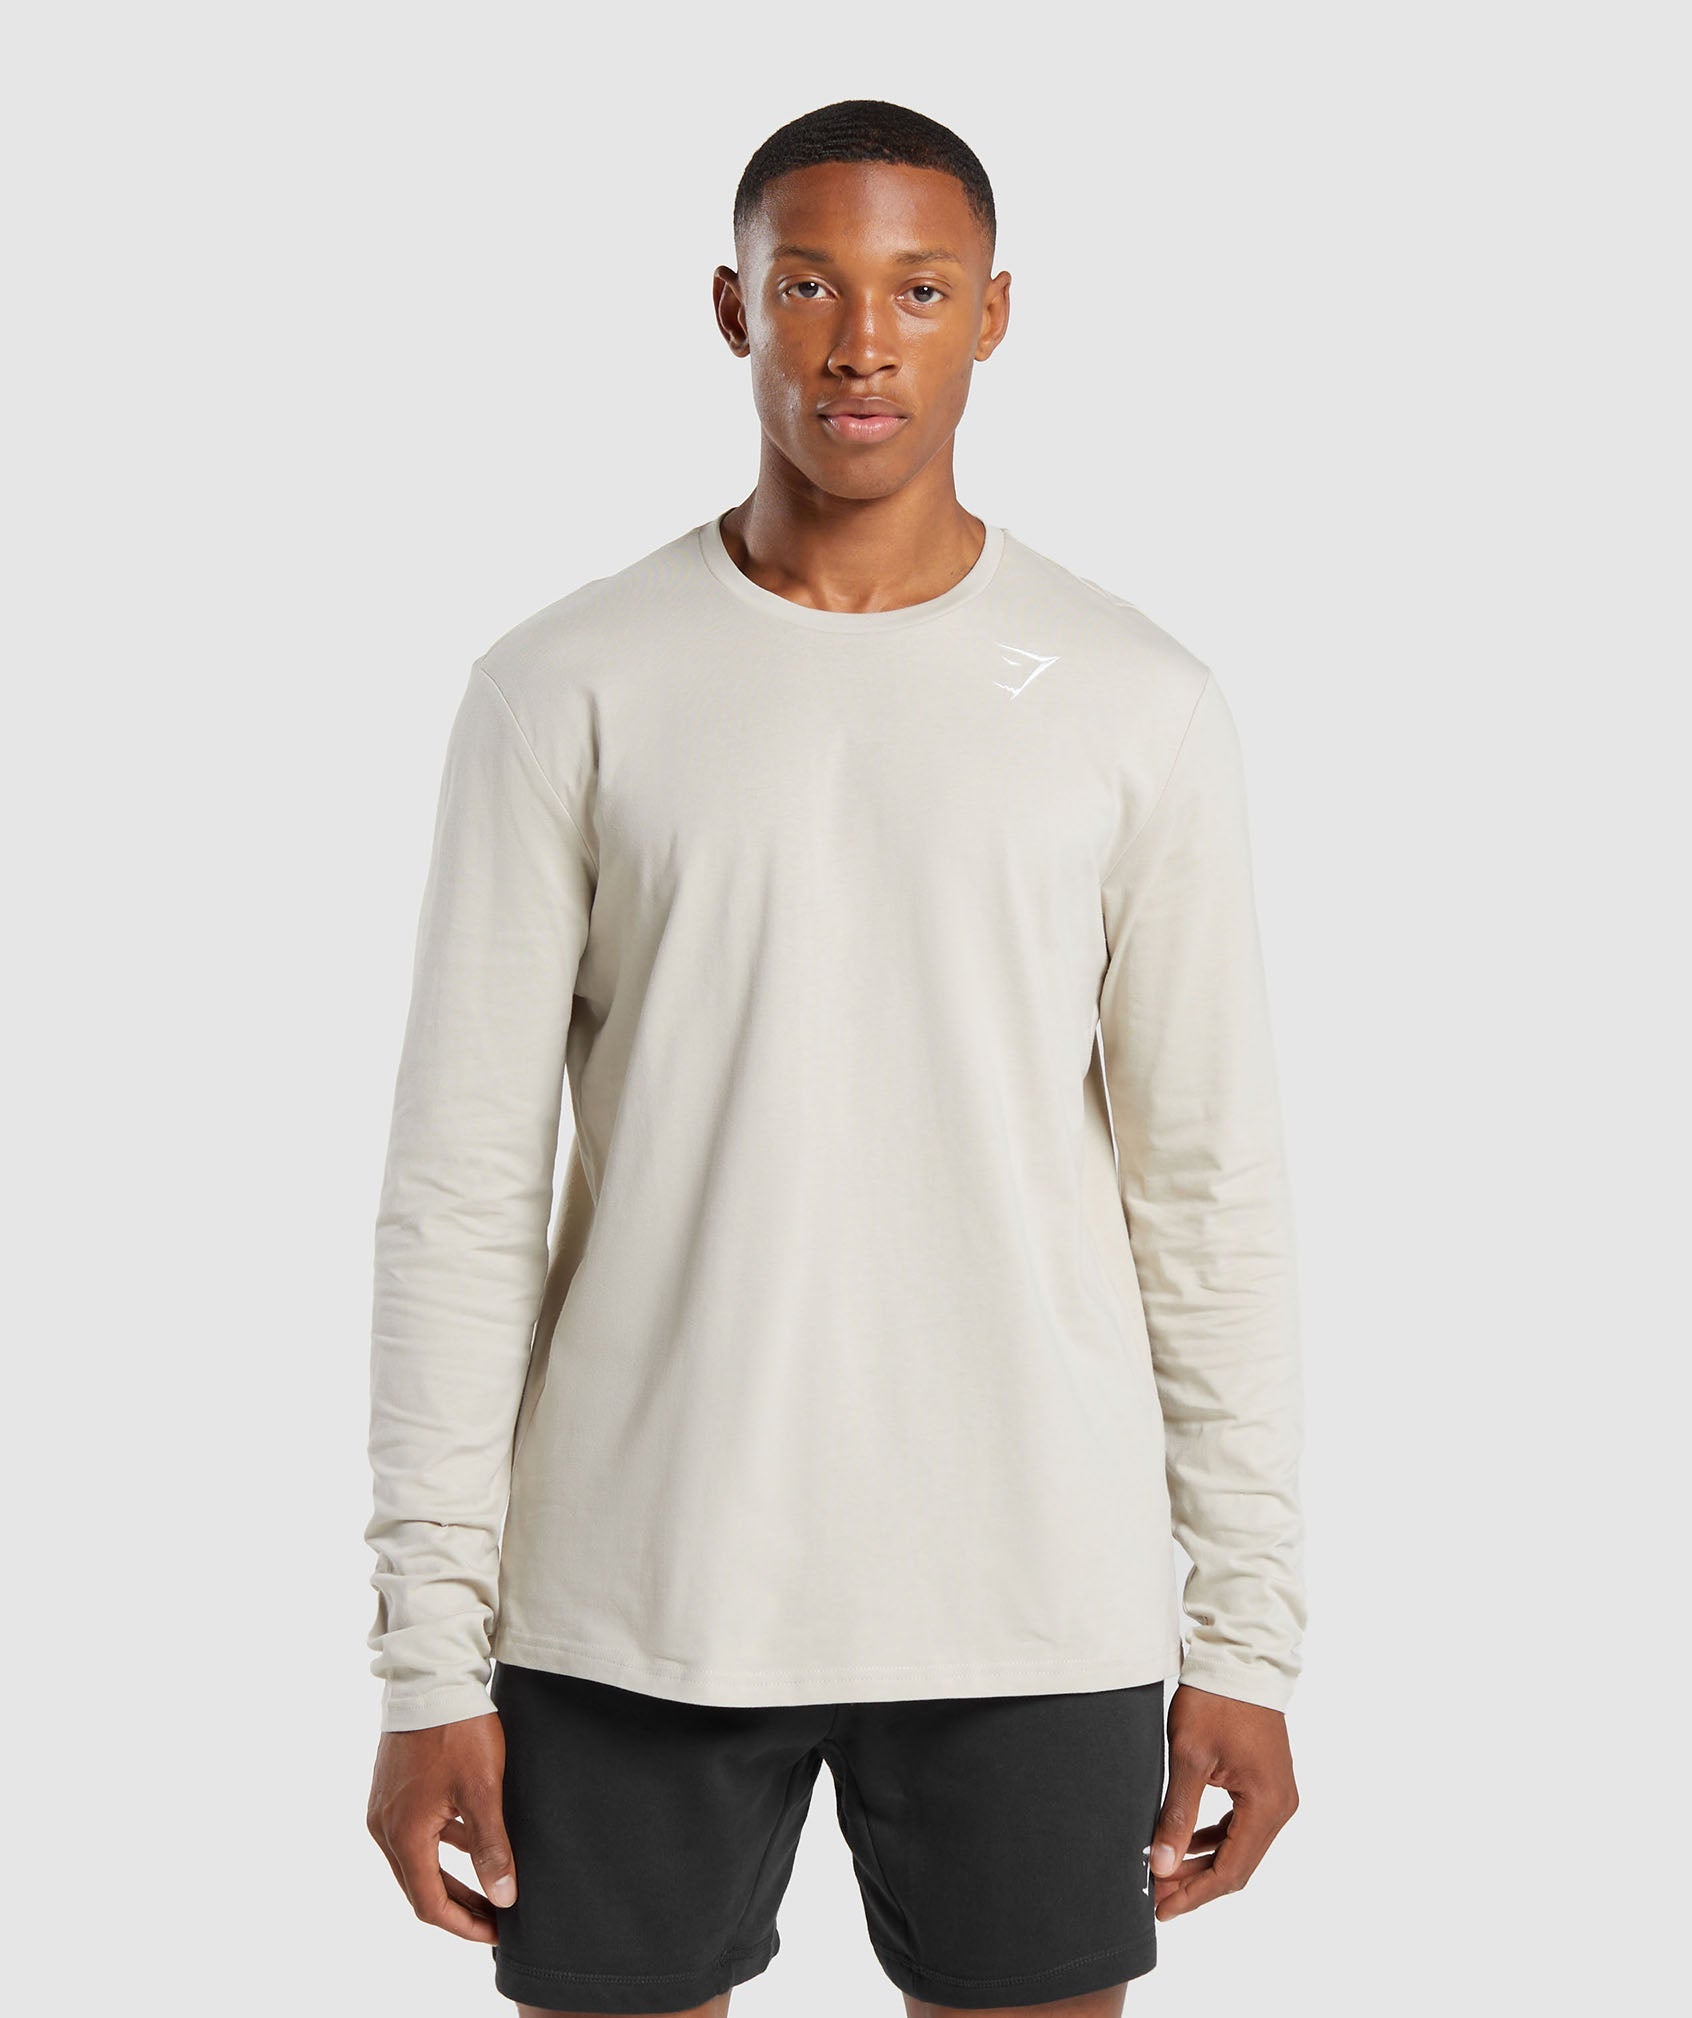 Crest Long Sleeve T-Shirt in Pebble Grey - view 1